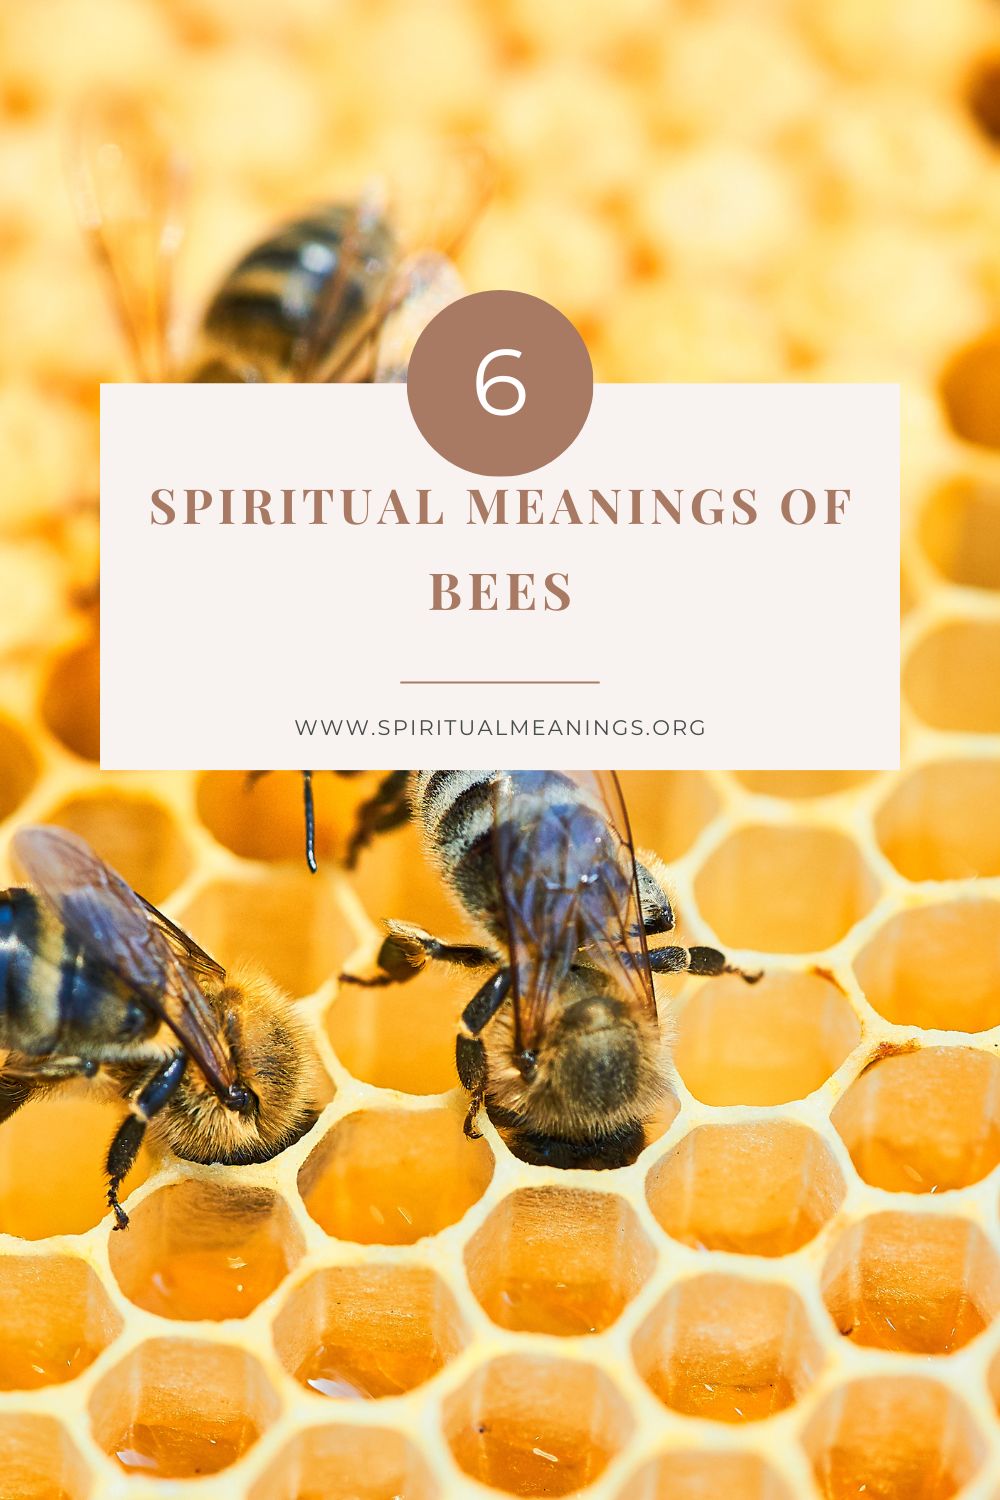 The Symbolism of Bees in the Ancient World